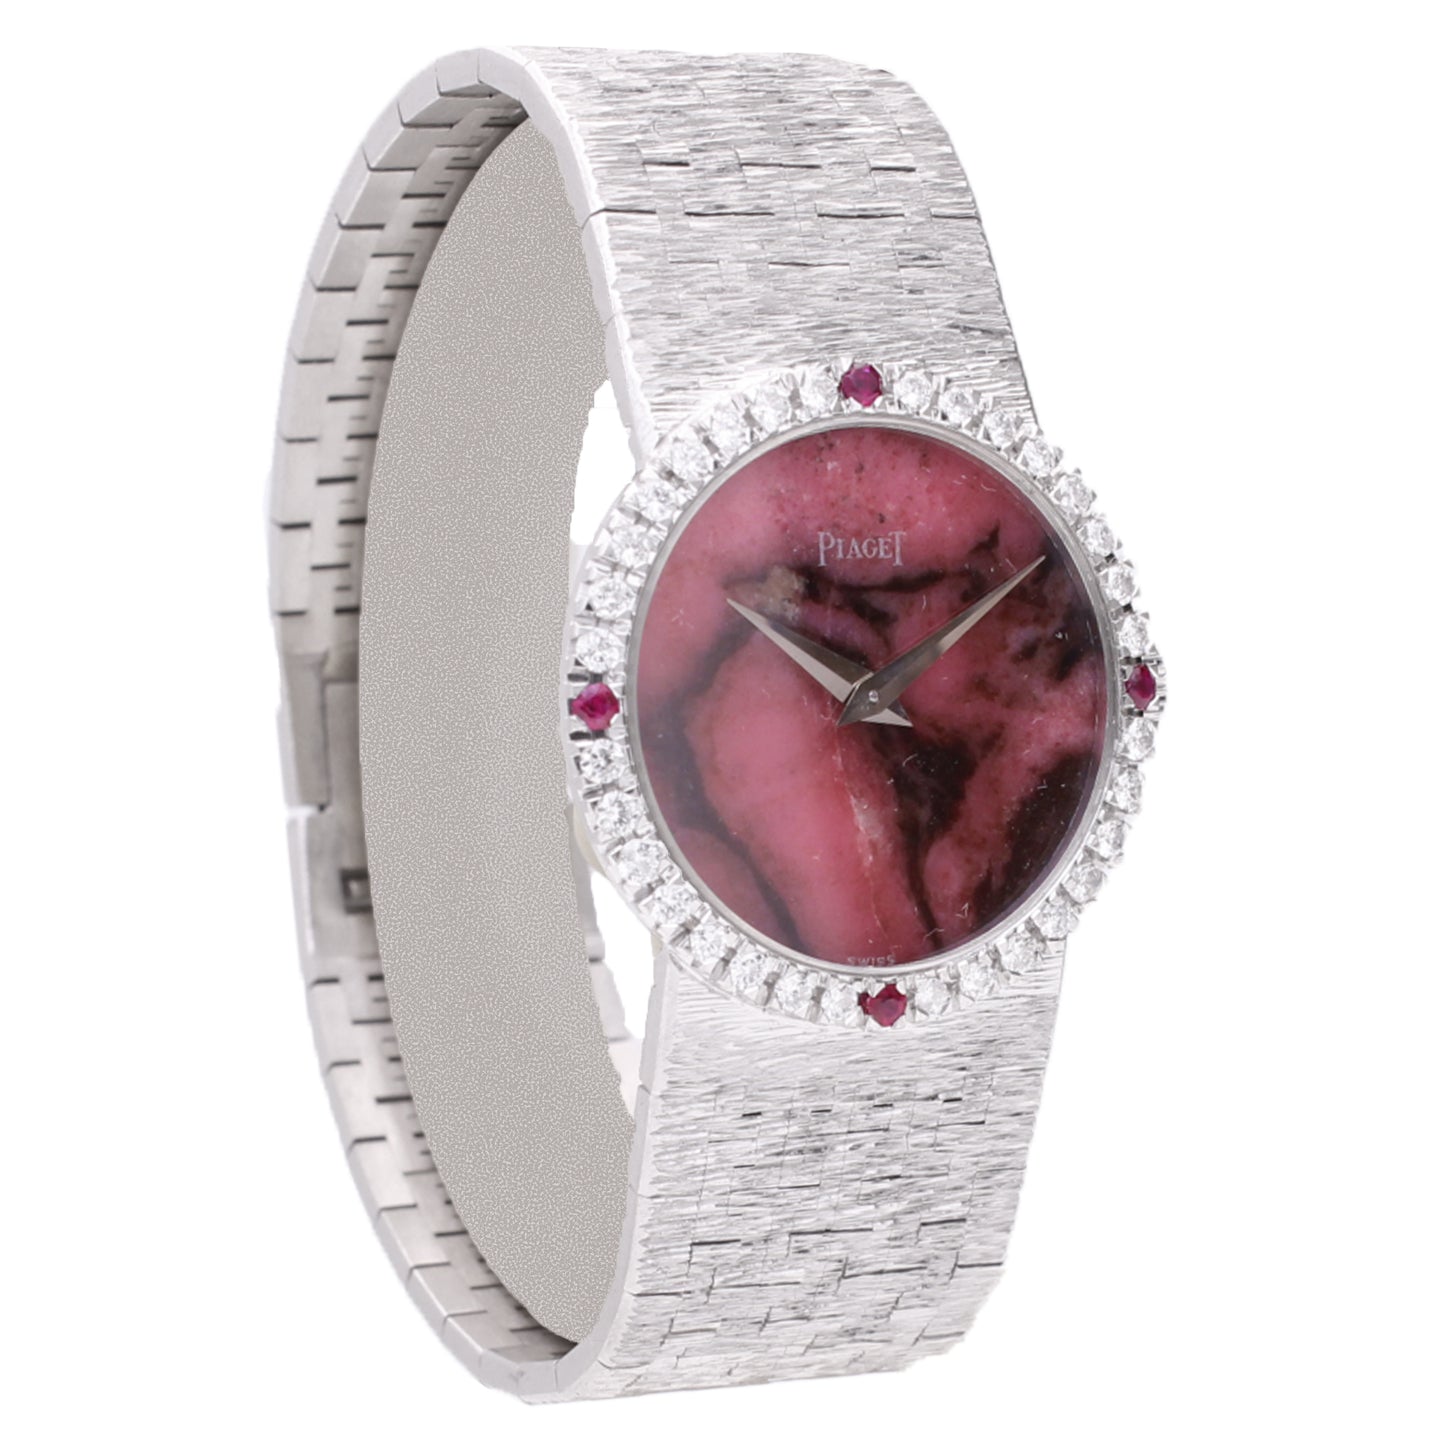 18ct white gold rhodonite dial bracelet watch. Made 1970